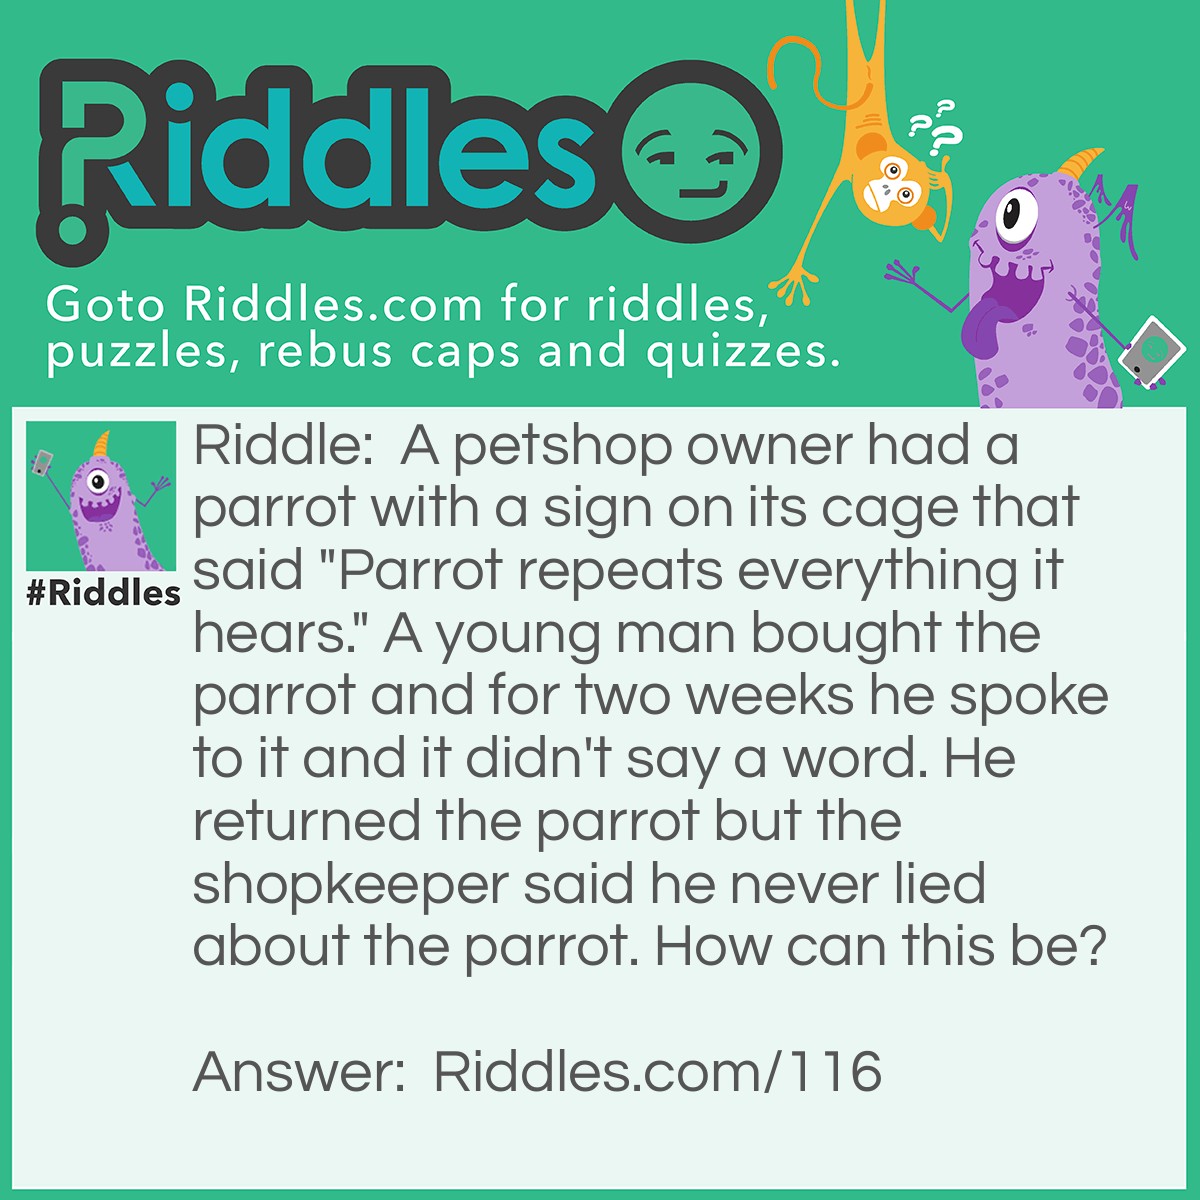 Riddle: A pet shop owner had a parrot with a sign on its cage that said "Parrot repeats everything it hears." A young man bought the parrot and for two weeks he spoke to it and it didn't say a word. He returned the parrot but the shopkeeper said he never lied about the parrot. How can this be? Answer: The parrot was deaf!